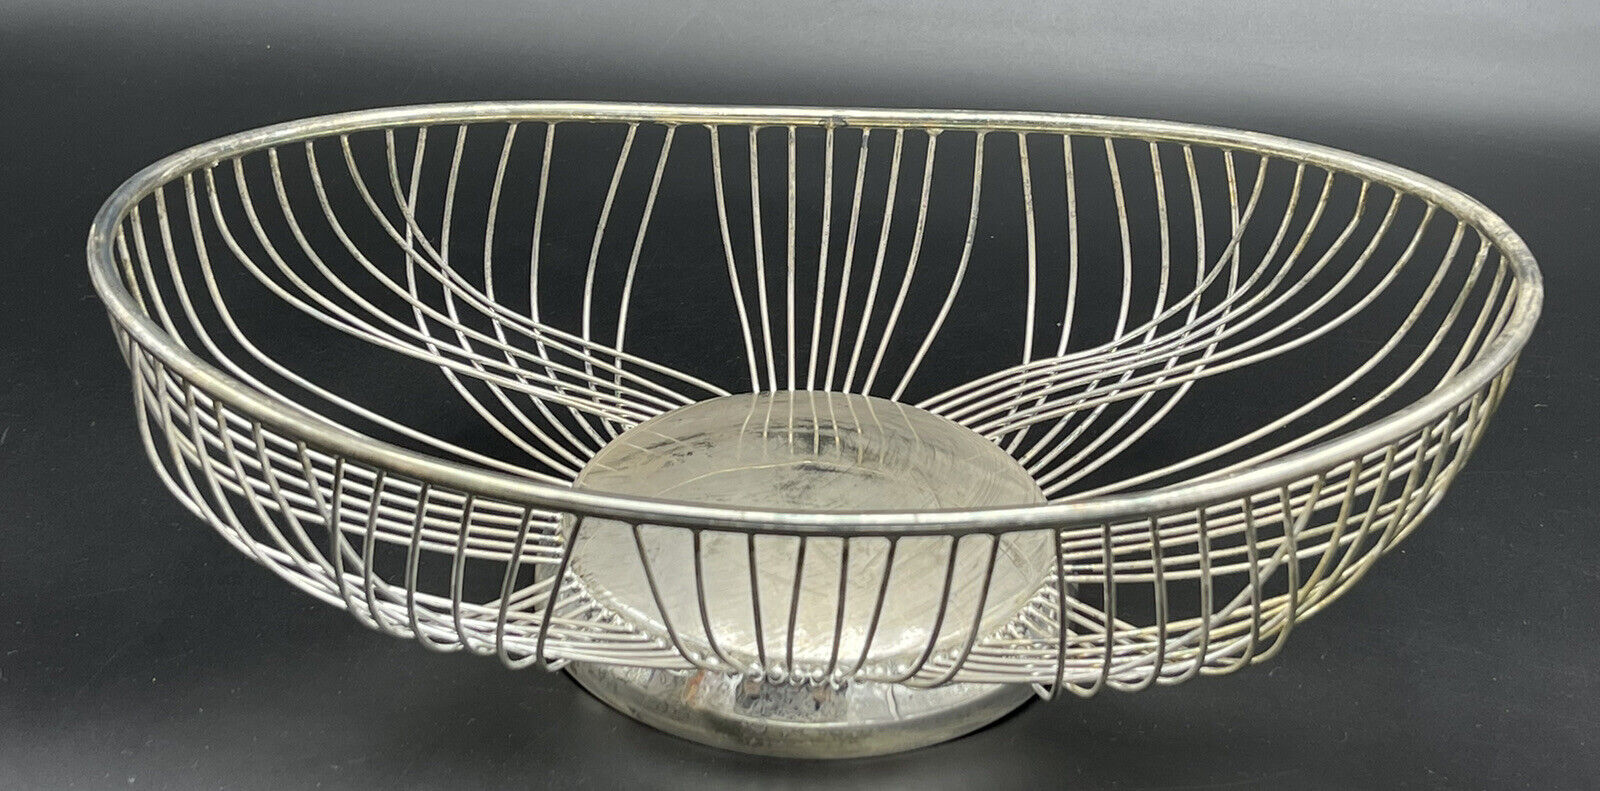 International Silver Company Silverplated Oval Wire Basket Silver in Box